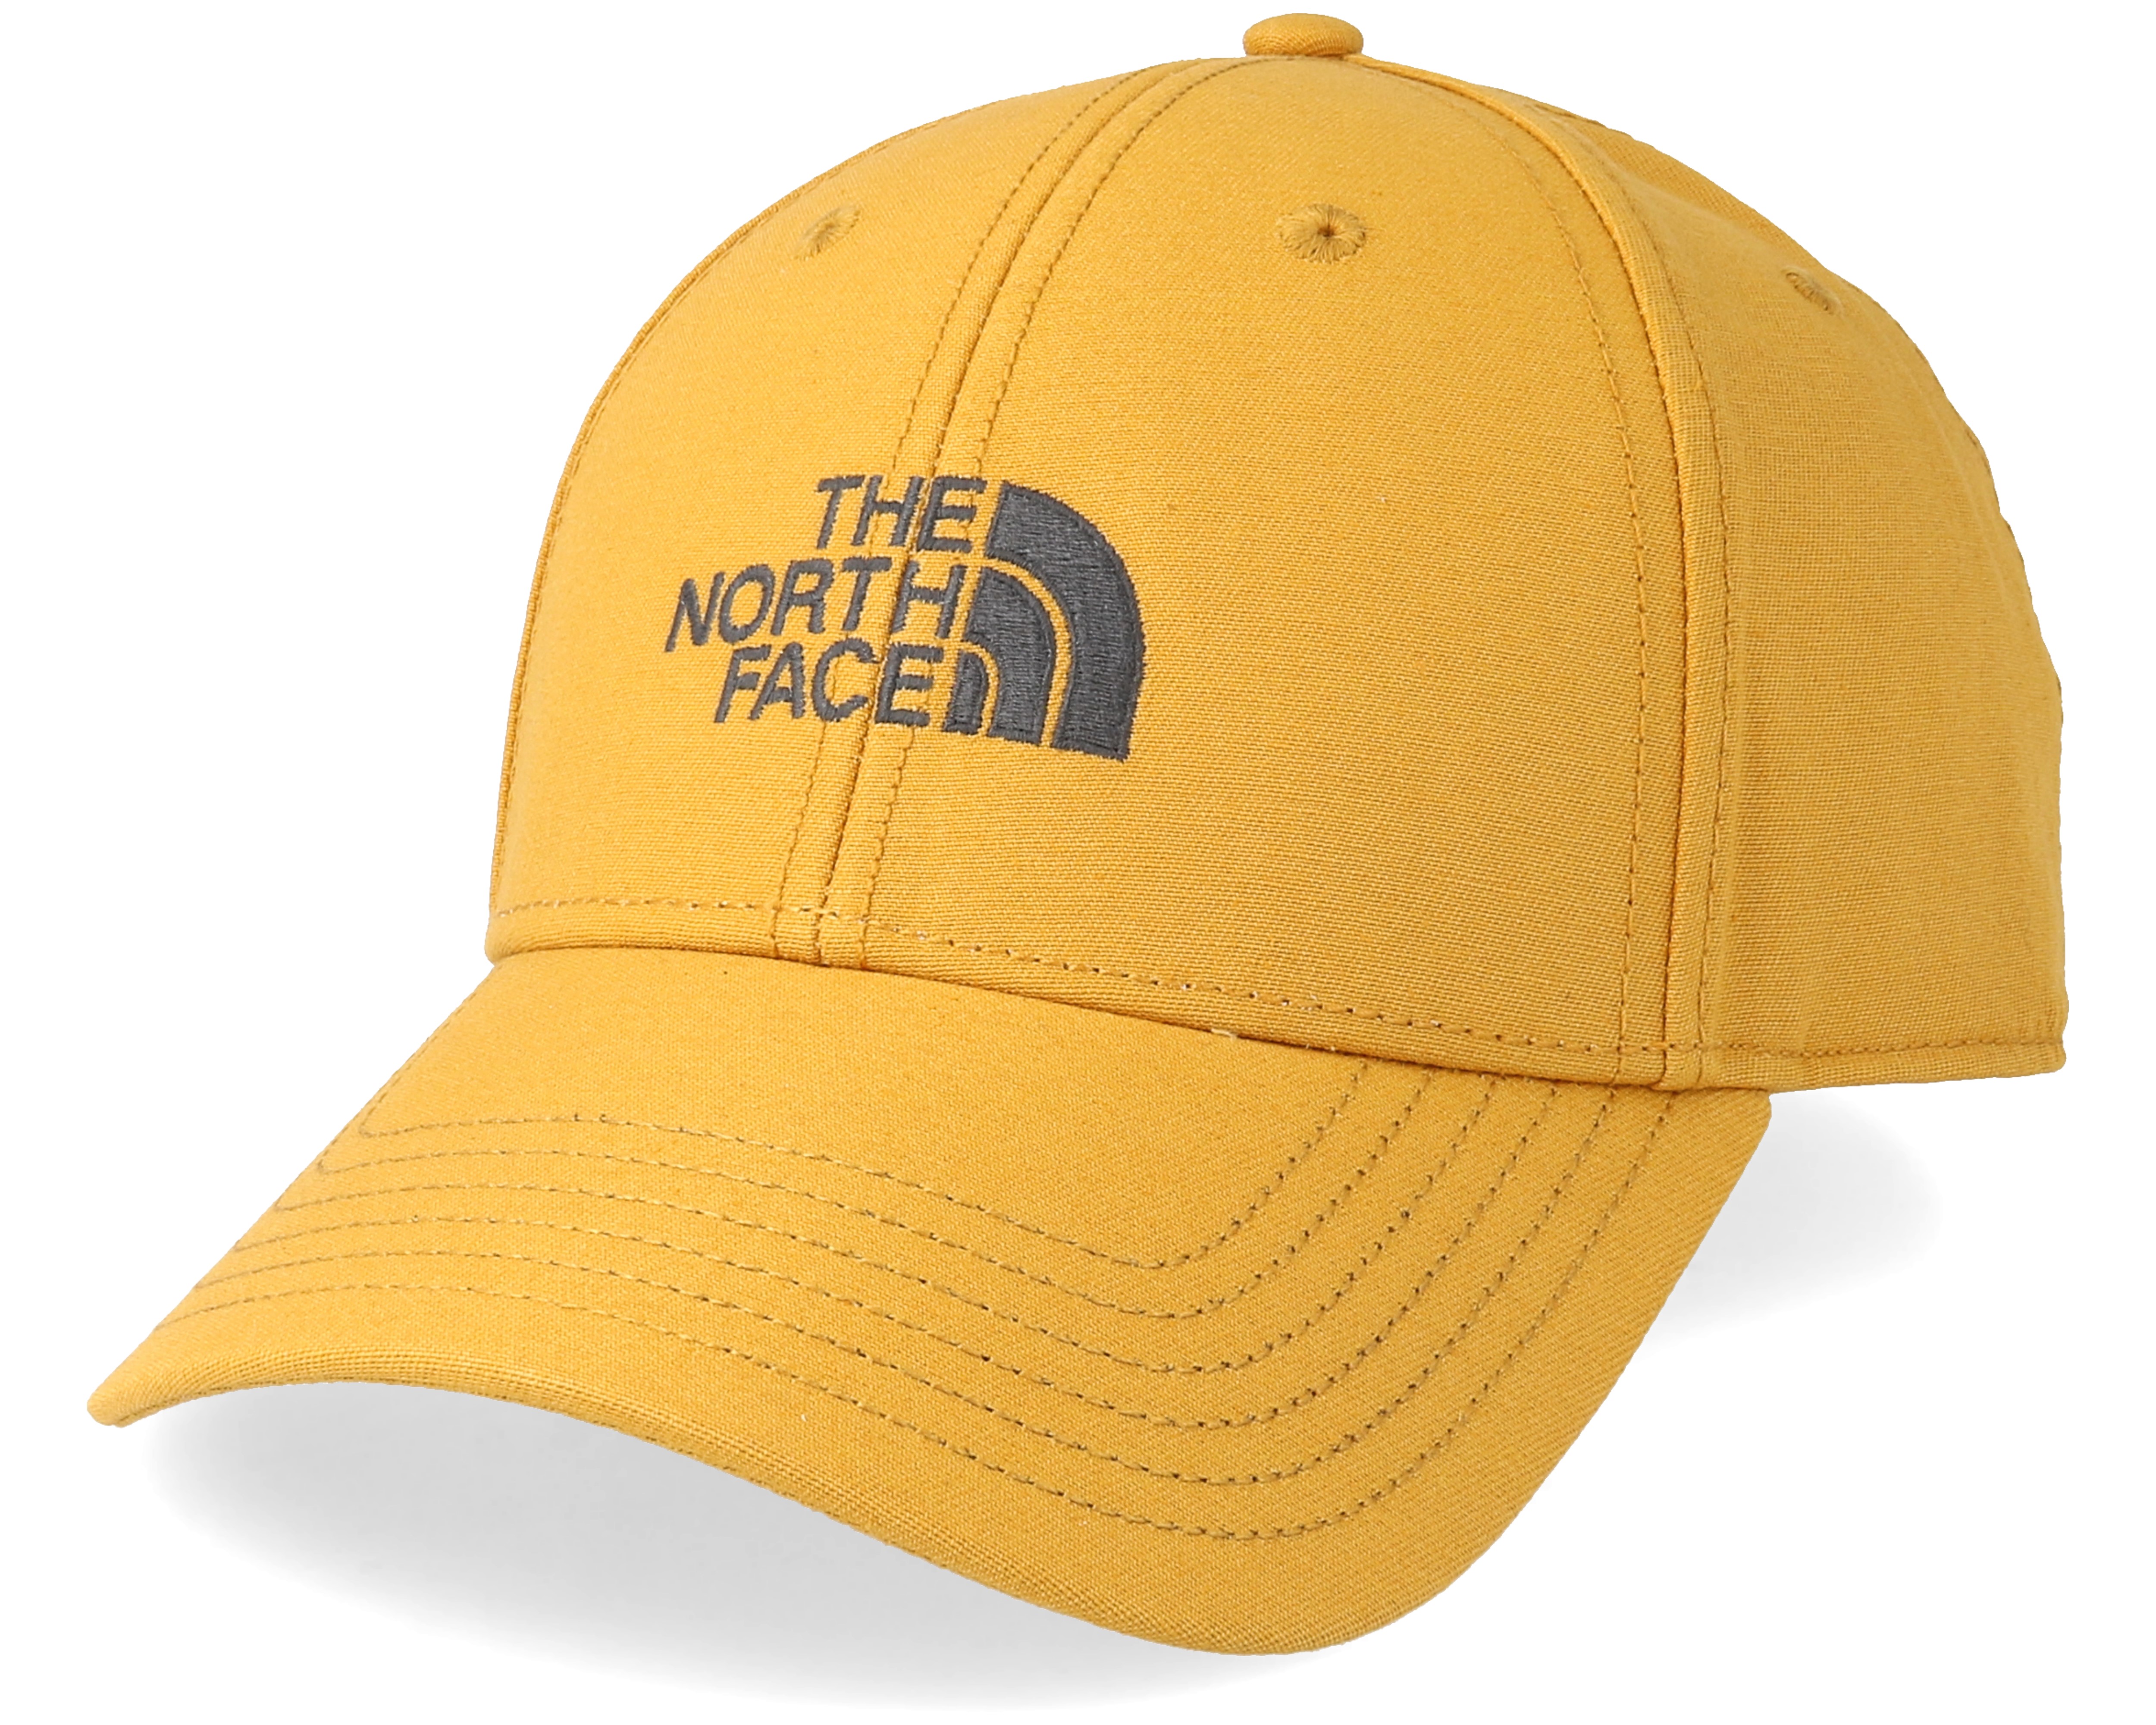 Classic Citrine Yellow Adjustable - The North Face caps | Hatstore.co.uk